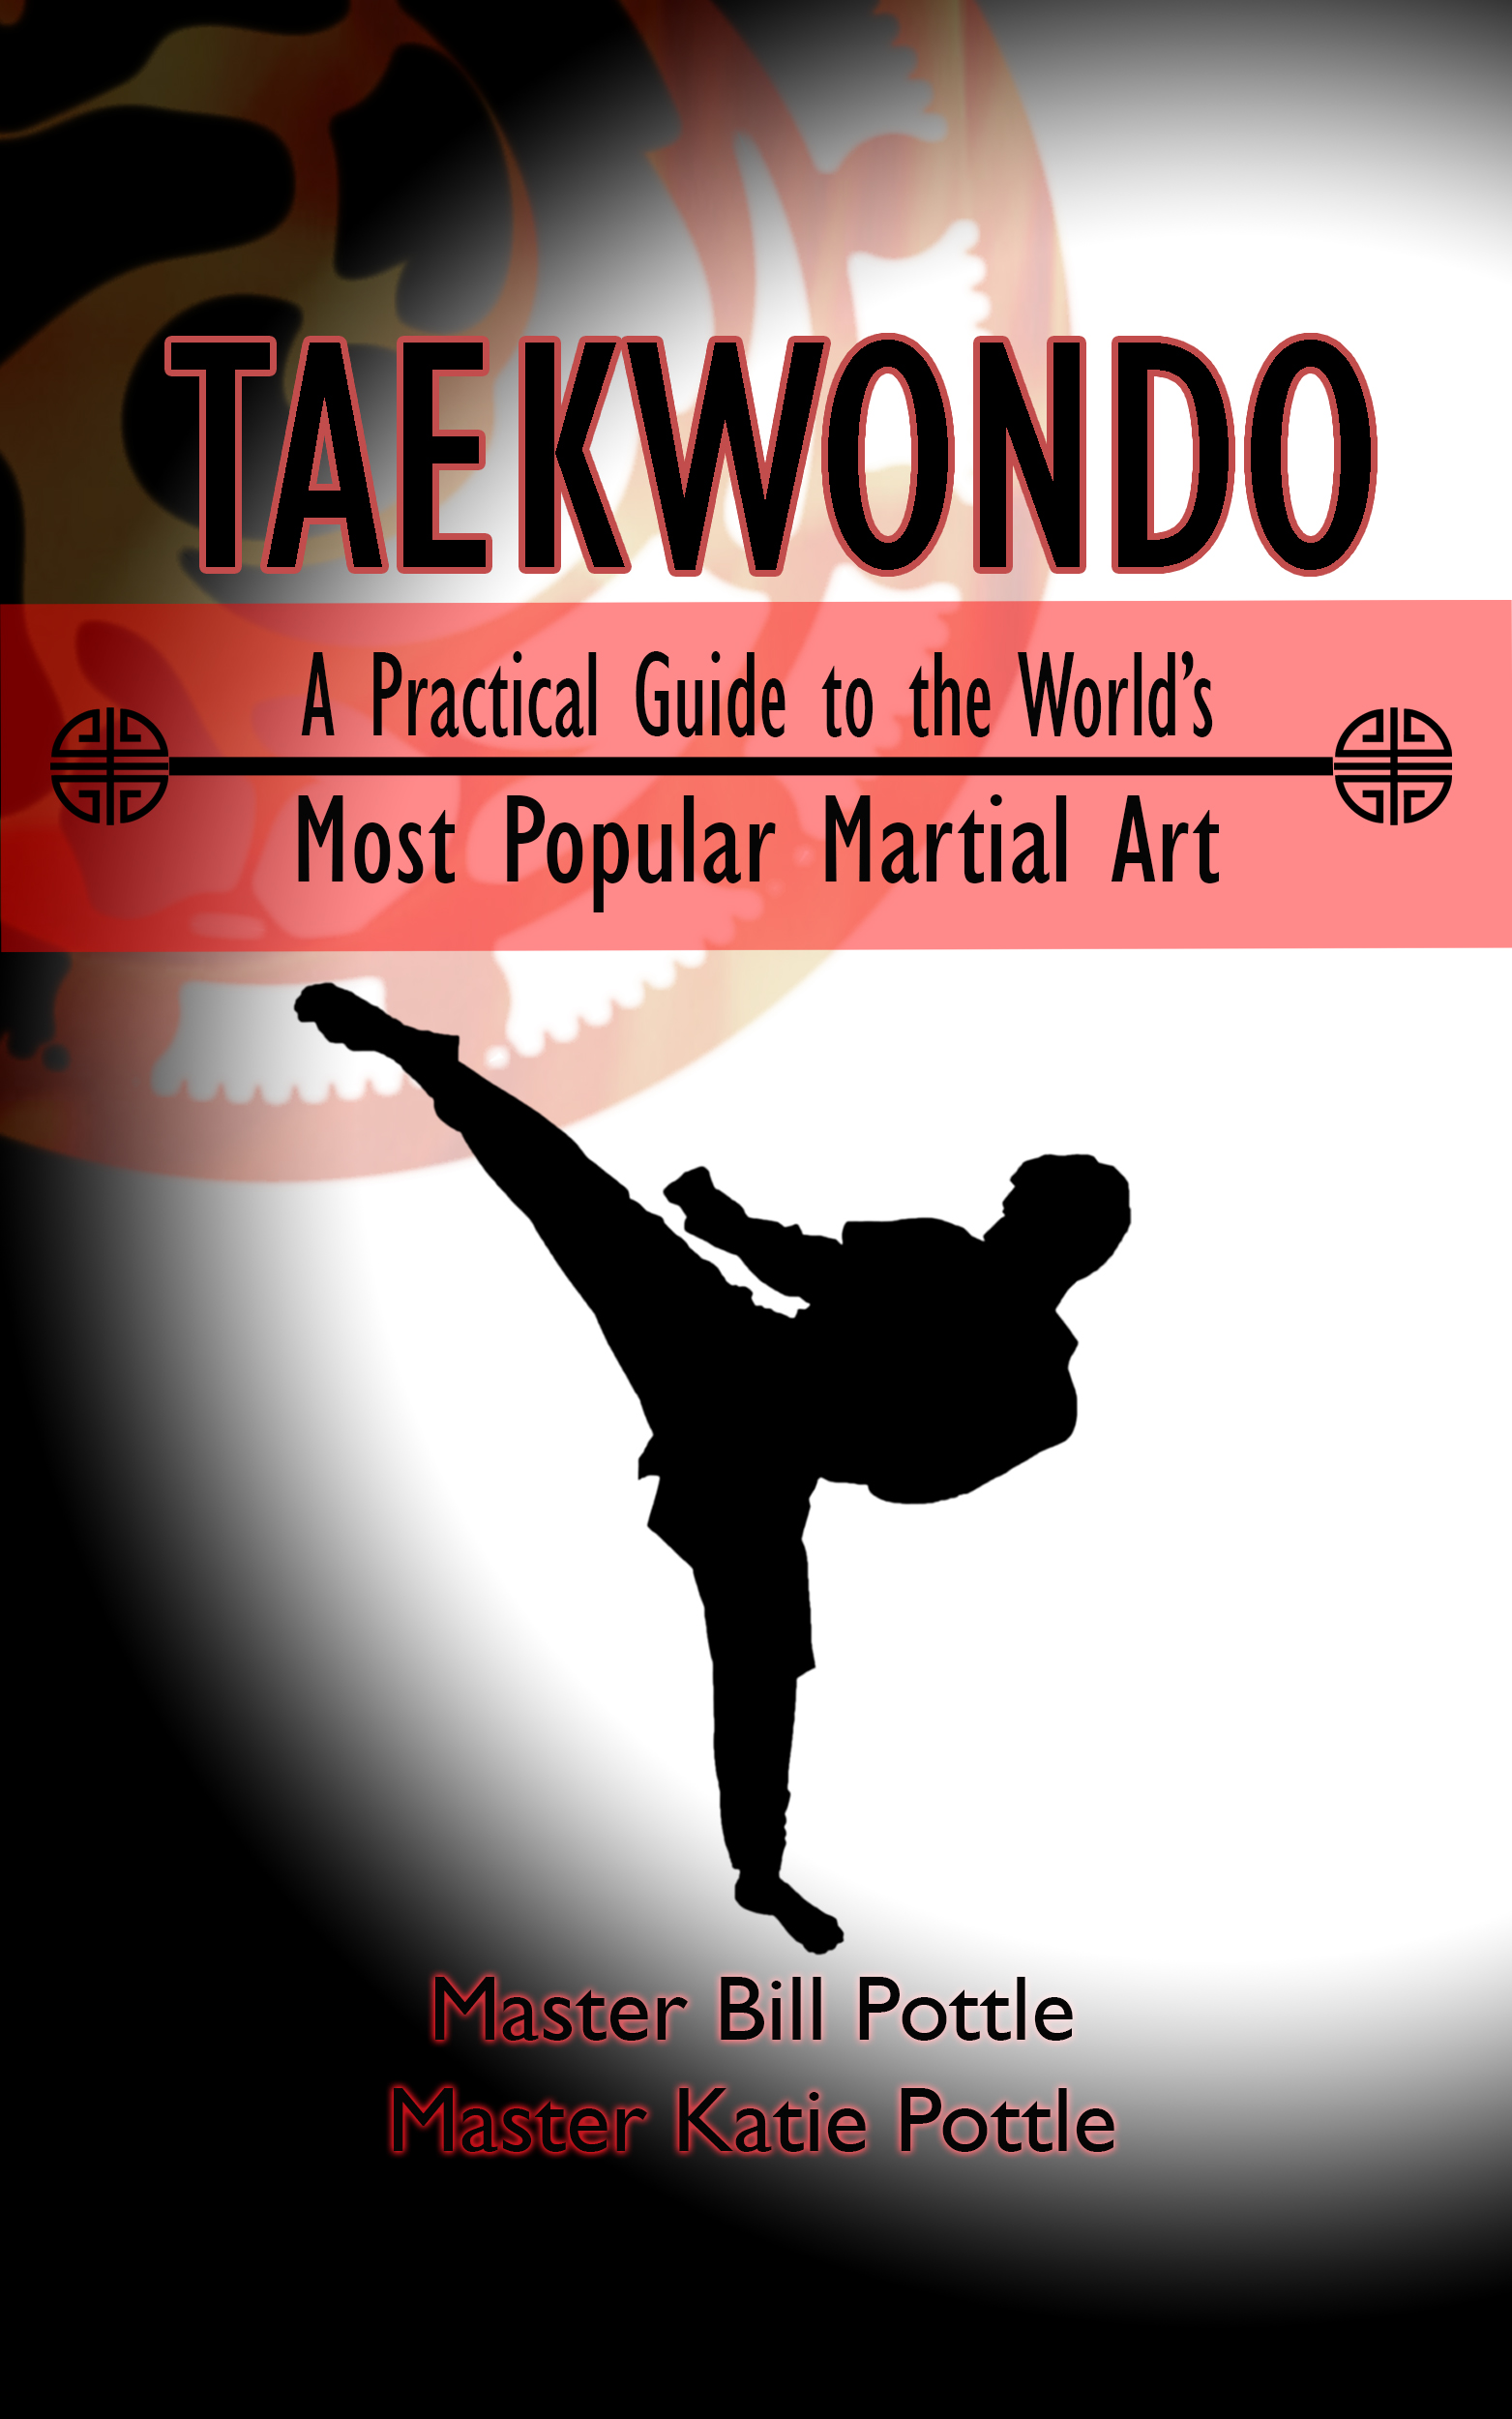 FREE: Taekwondo: A Practical Guide to the World’s Most Popular Martial Art by Katie Pottle, Bill Pottle